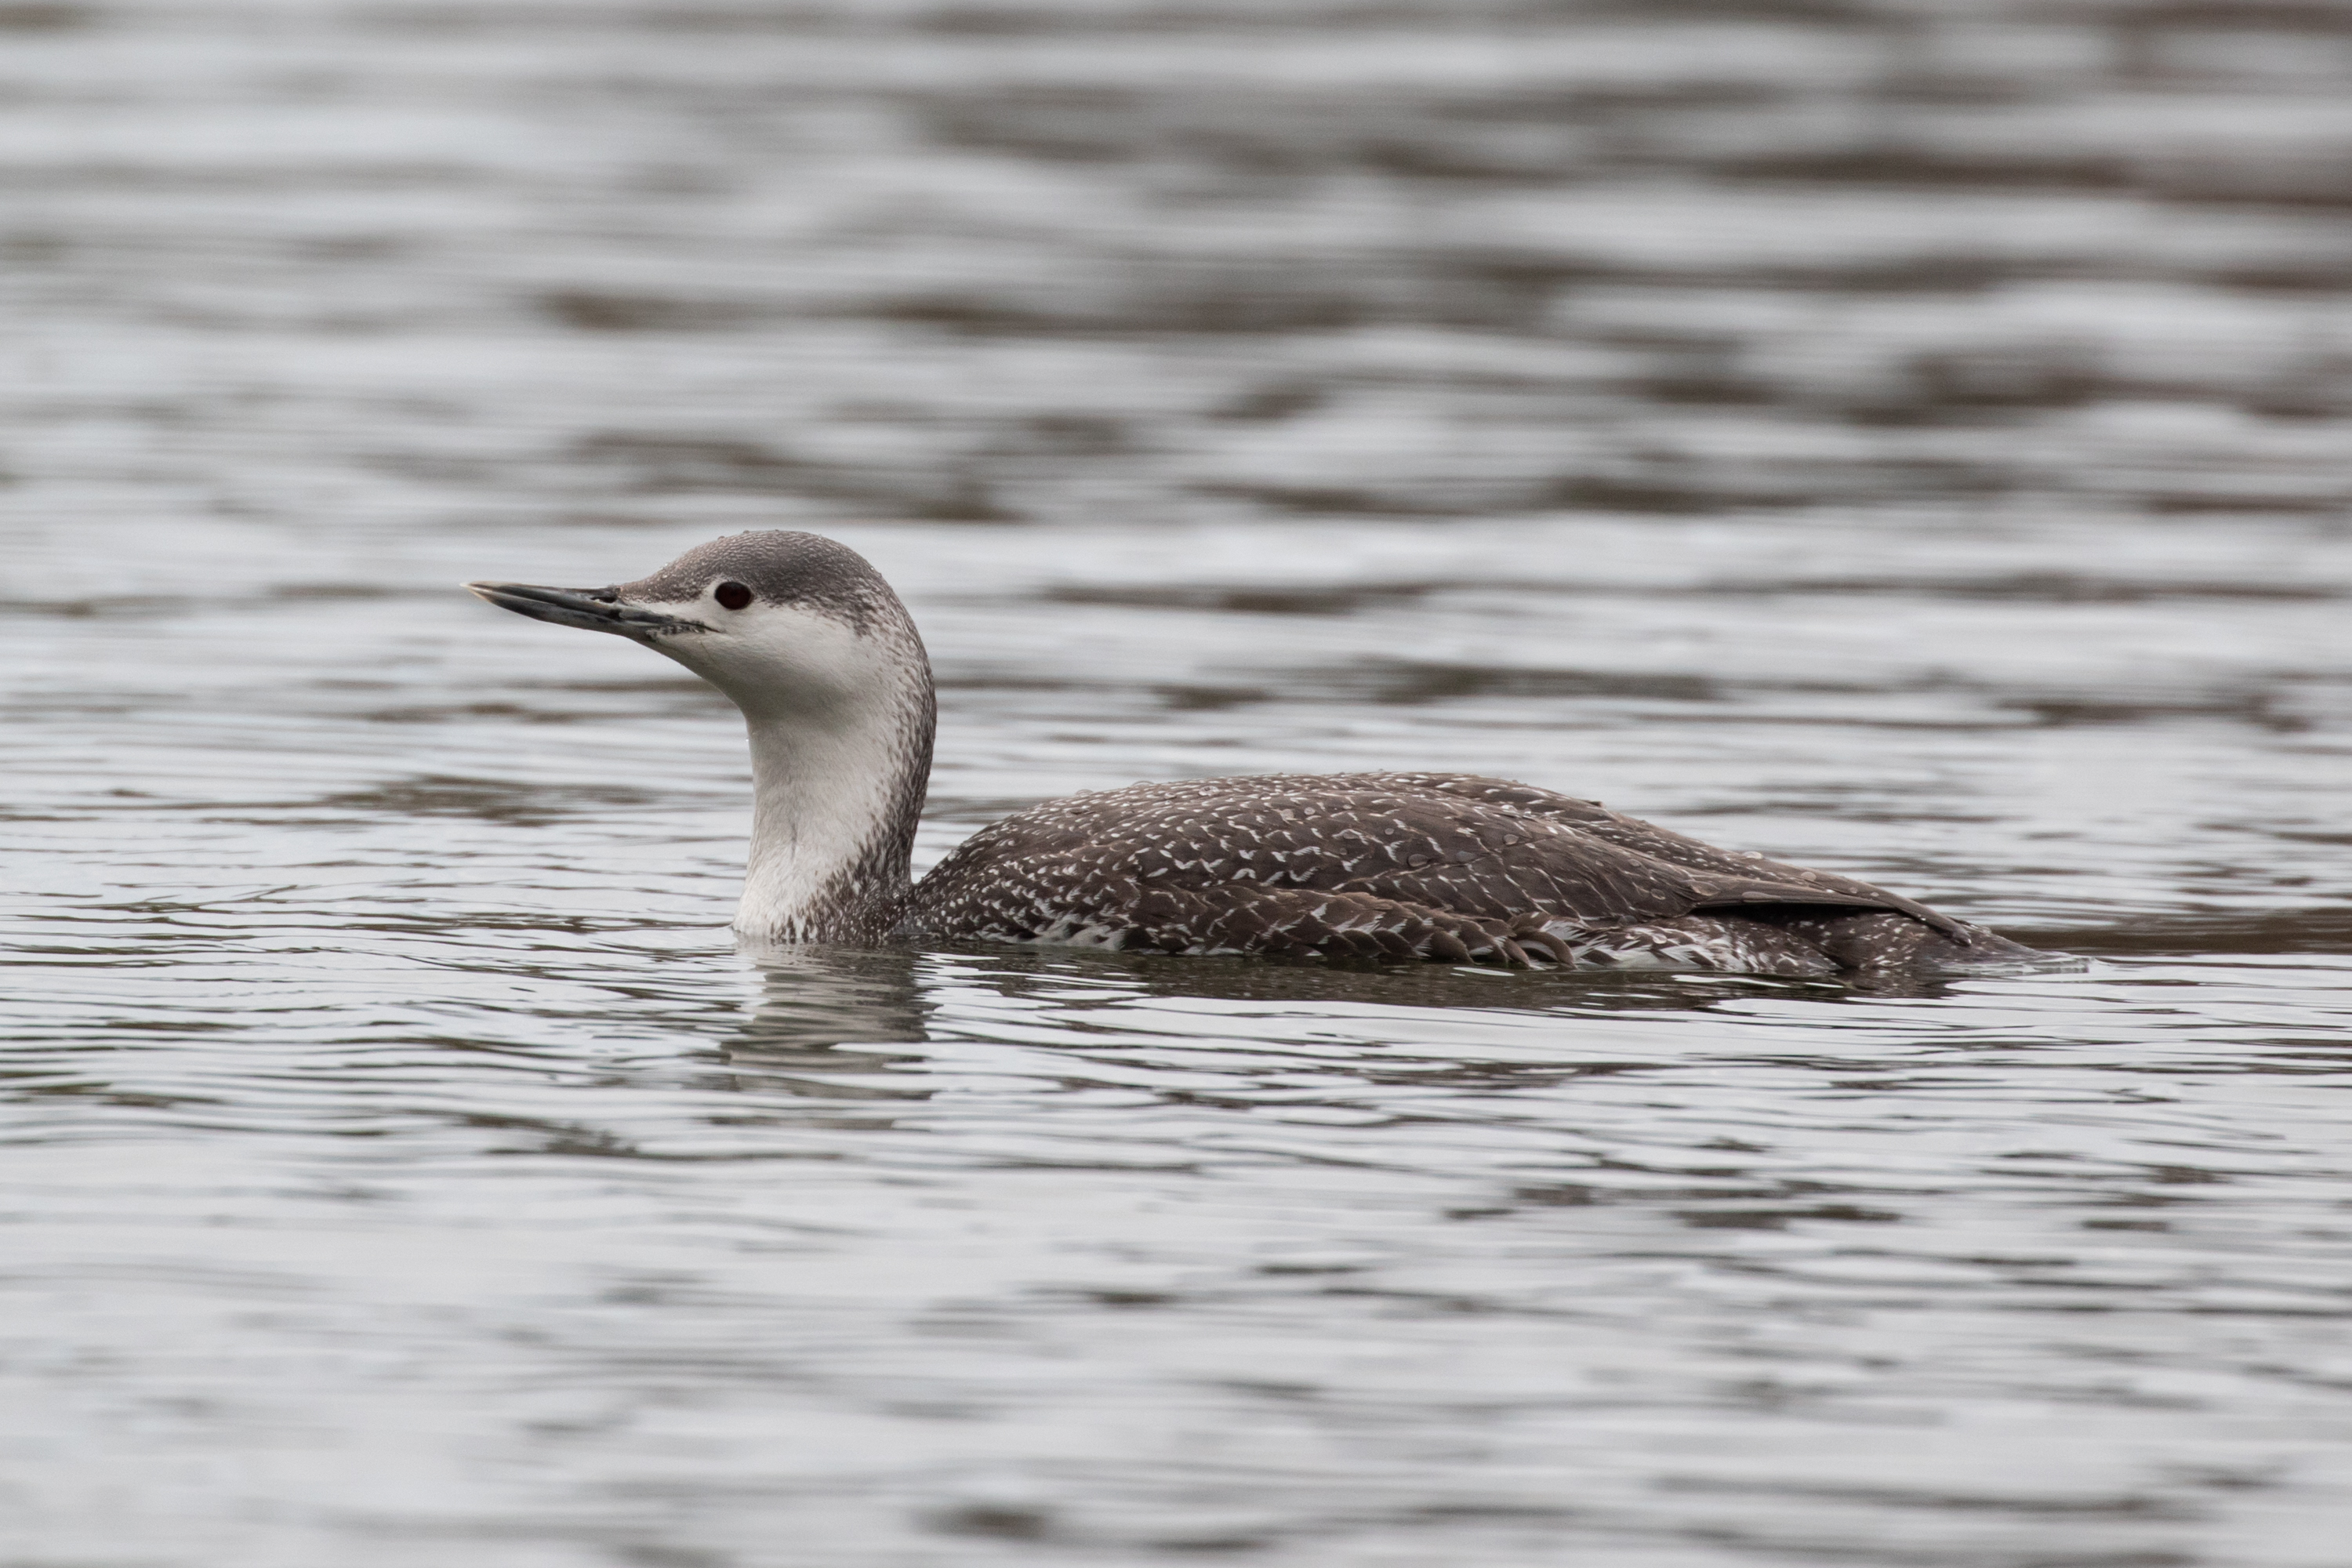 Unexpected waterbirds, such as this Red-throated Loon, frequently show up on Prospect Park’s waterways. Photo: <a href="https://www.flickr.com/photos/144871758@N05/" target="_blank">Ryan F. Mandelbaum</a>